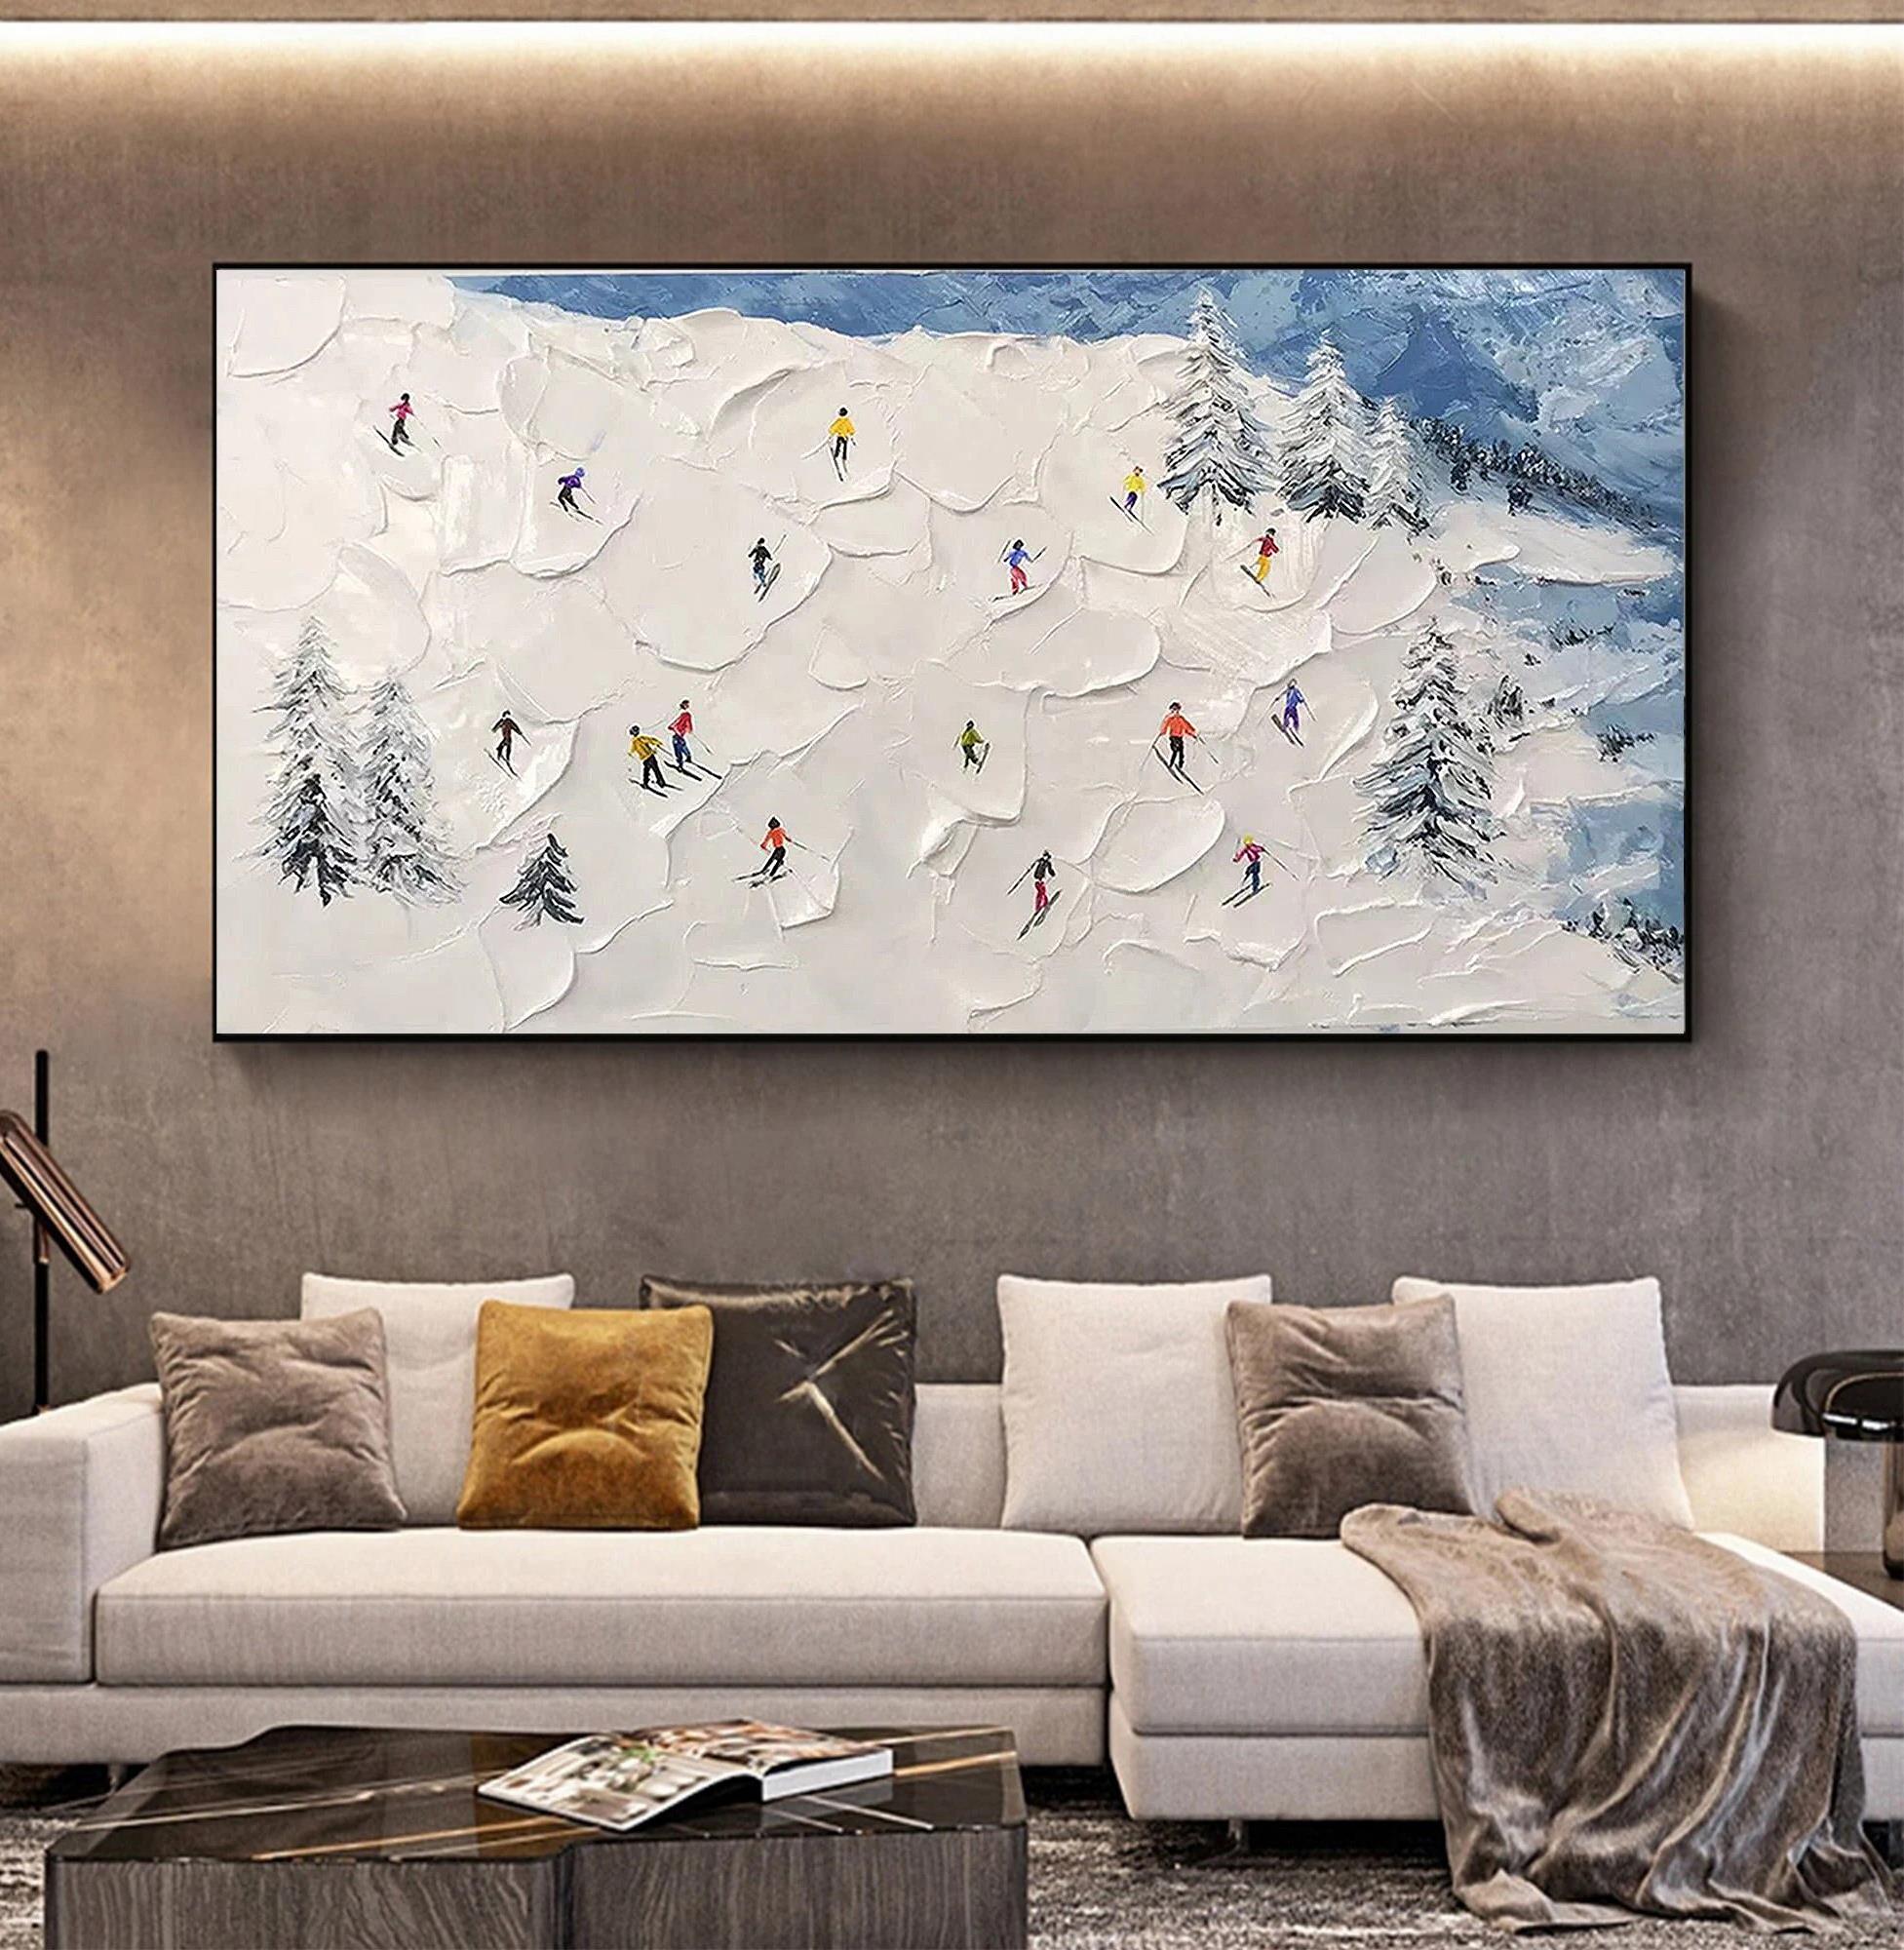 Skier on Snowy Mountain snow by Palette Knife wall art minimalism texture Oil Paintings